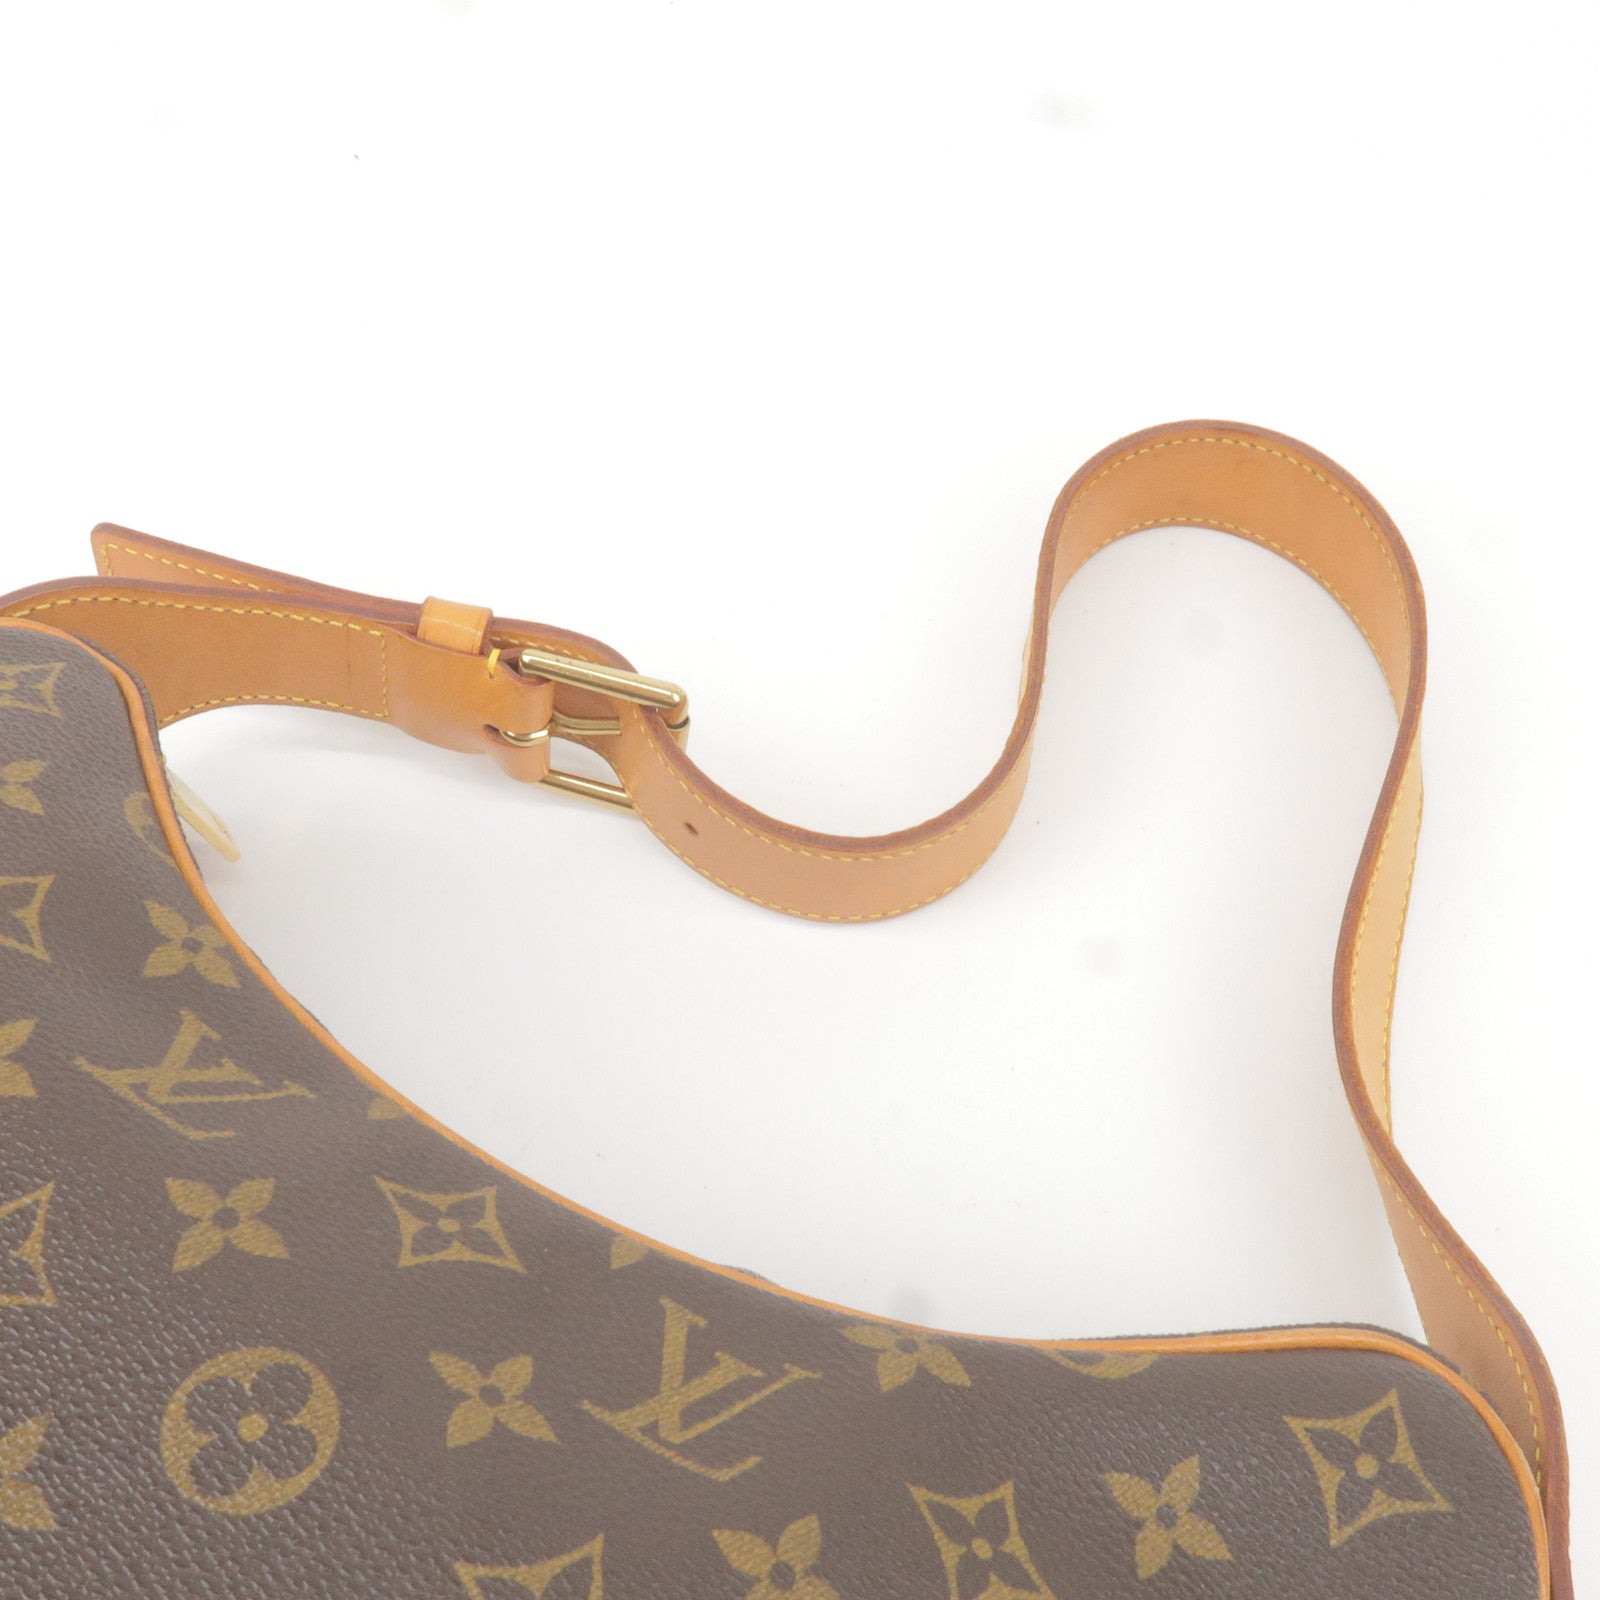 Louis Vuitton 2017 pre-owned Limited Edition Chapman Brothers Shopping Bag  - Farfetch